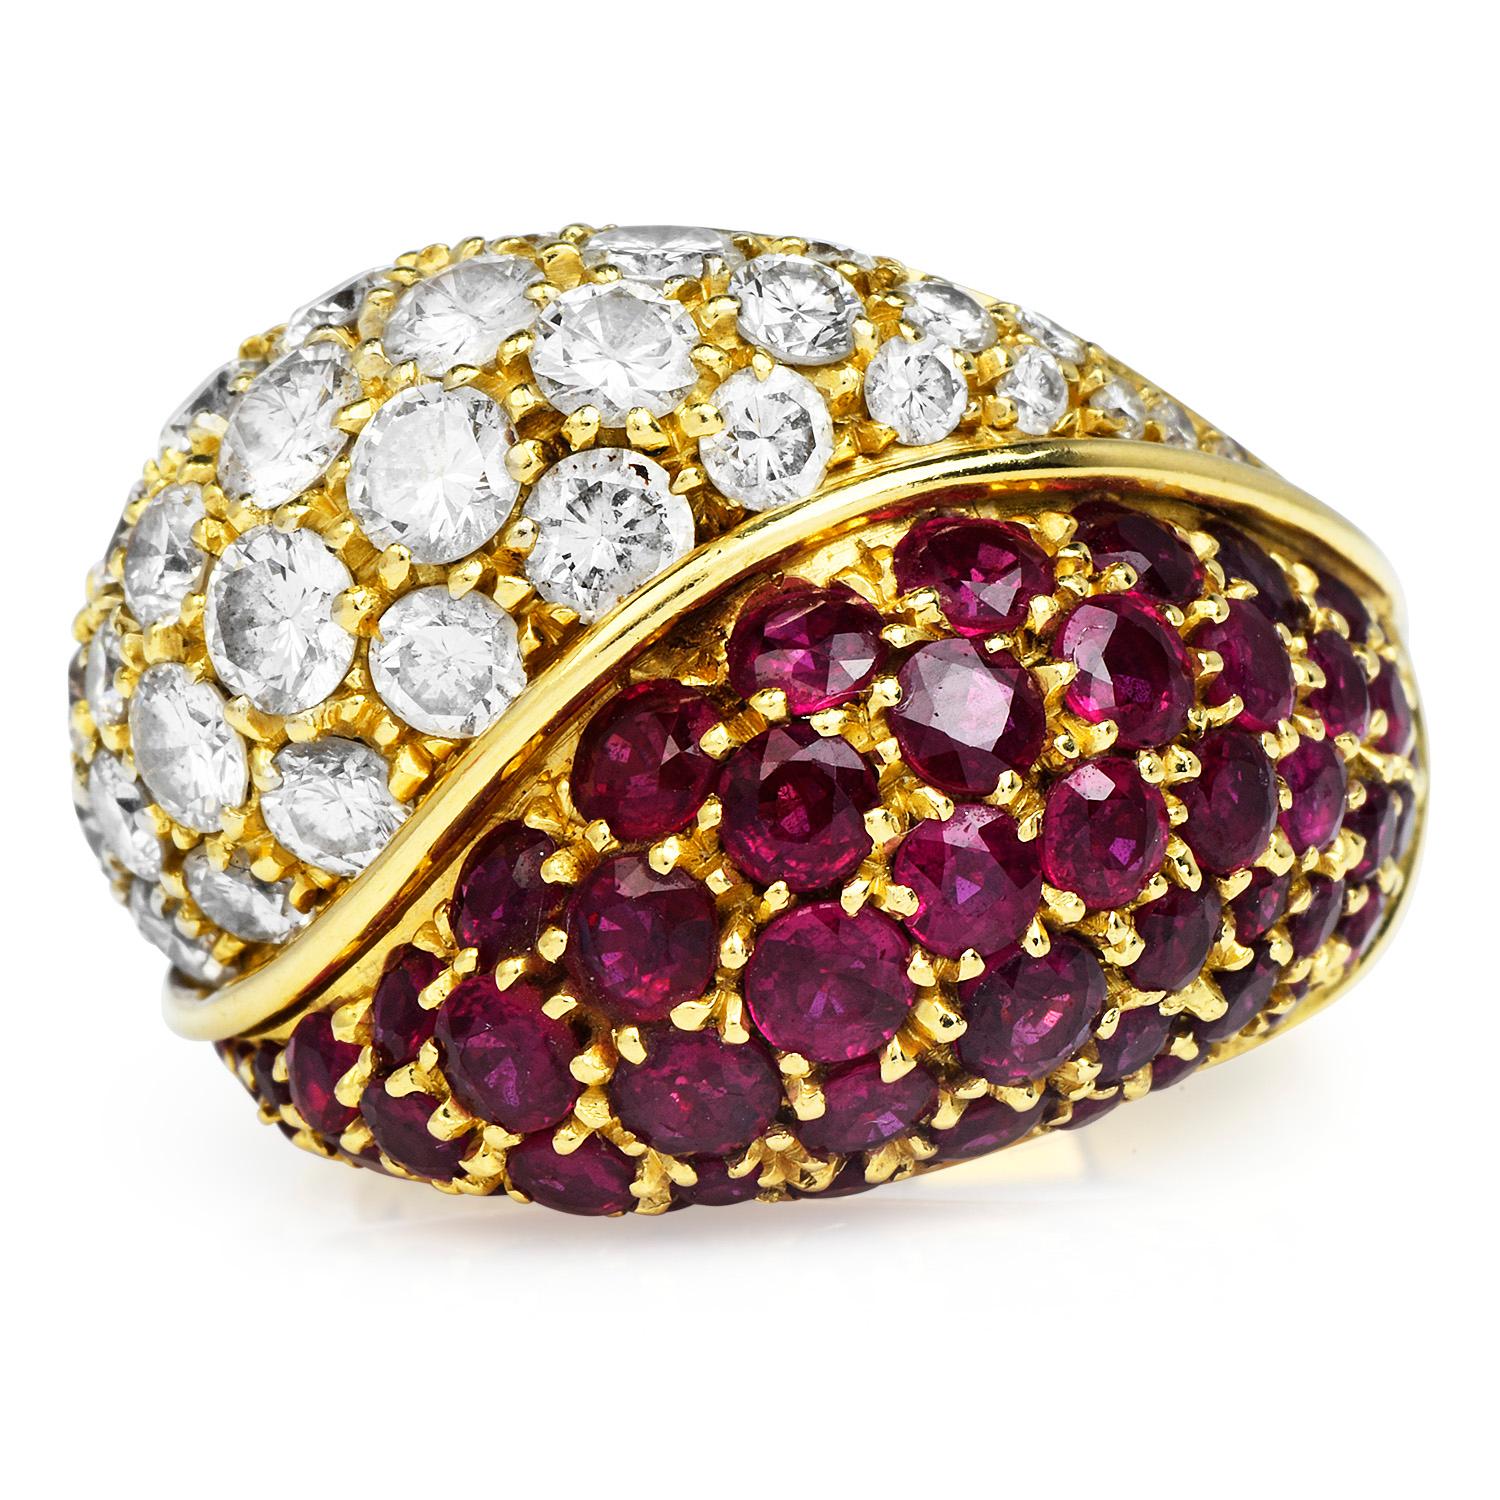 This estate circa 1980's cocktail ring is italian made in solid 18K yellow gold with an assemblage in a cluster bypass desing of genuine rubies and diamonds.

The center, round cut 48 genuine diamonds weigh approx. 5.00 carats. H-I  color, clarity.